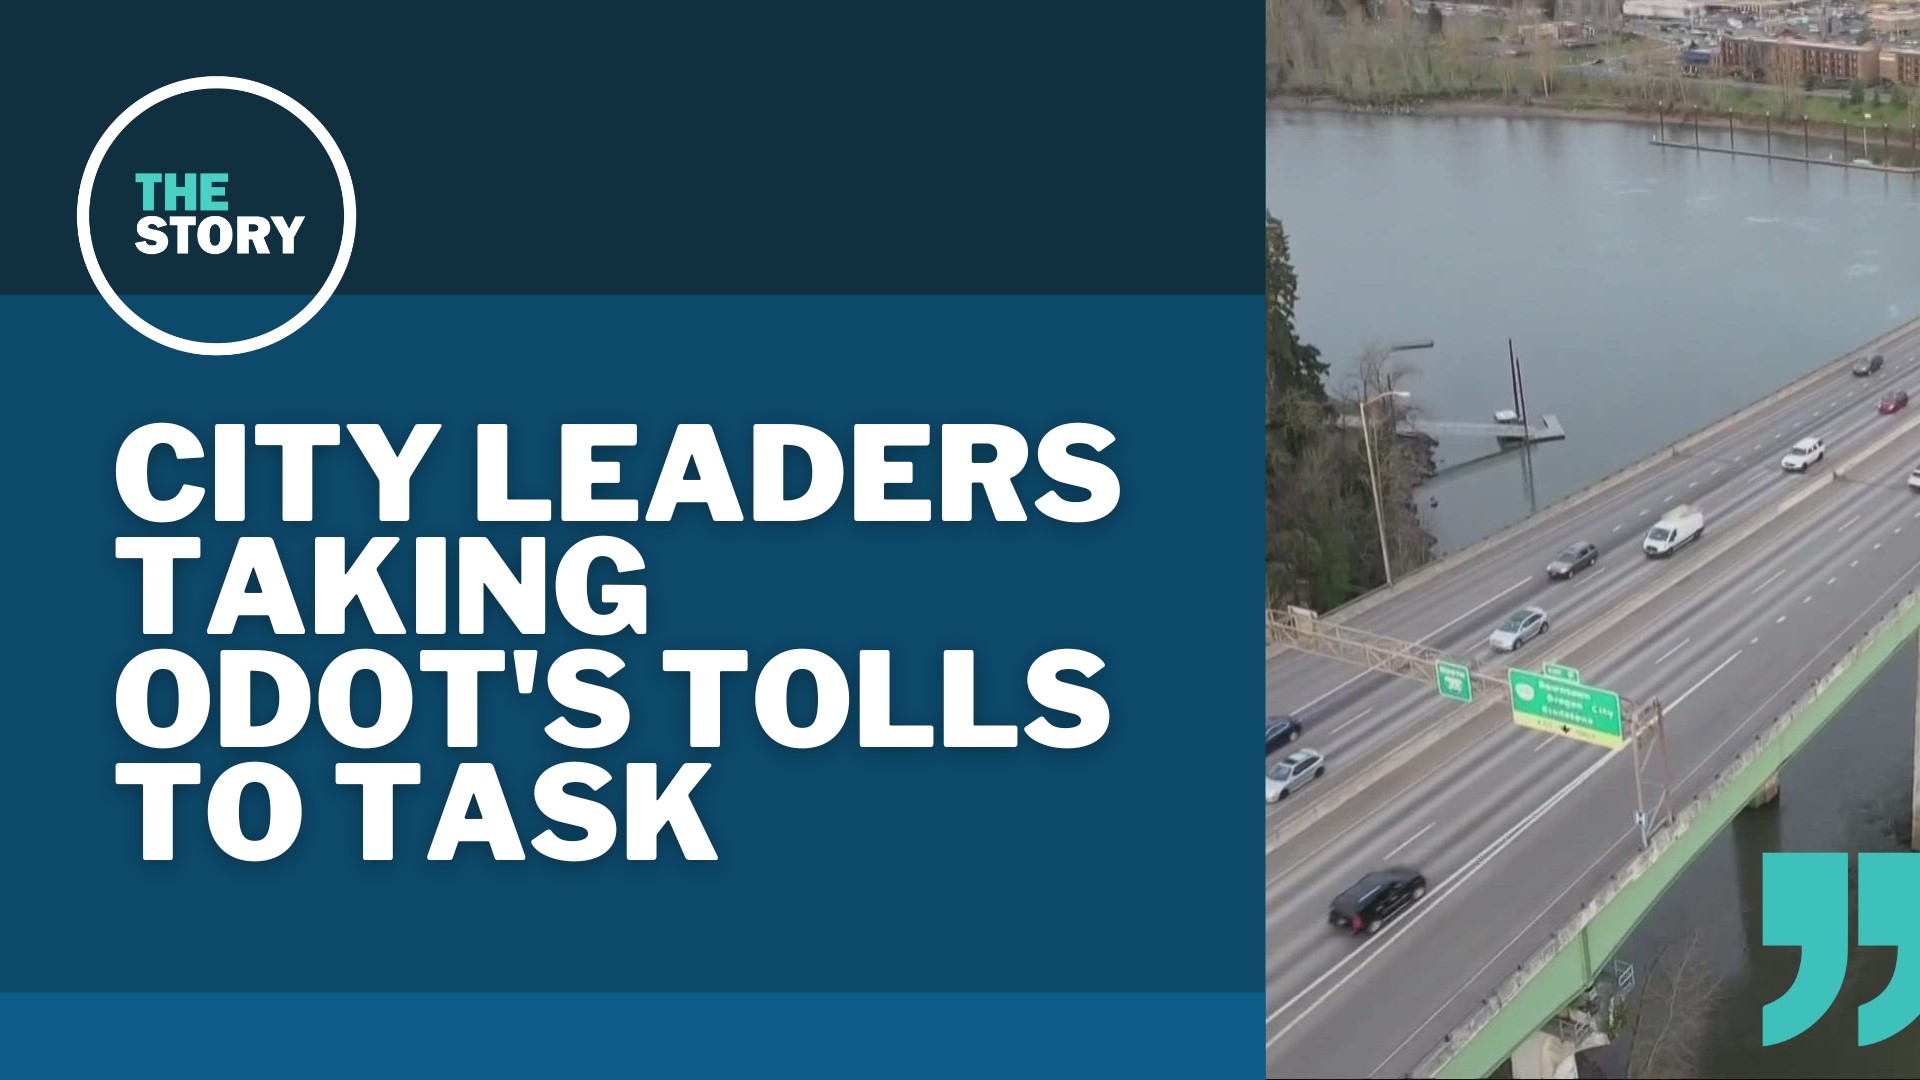 ODOT plans to toll I-205 where it crosses the Willamette and Tualatin rivers. But that will have an outsized impact on these communities.